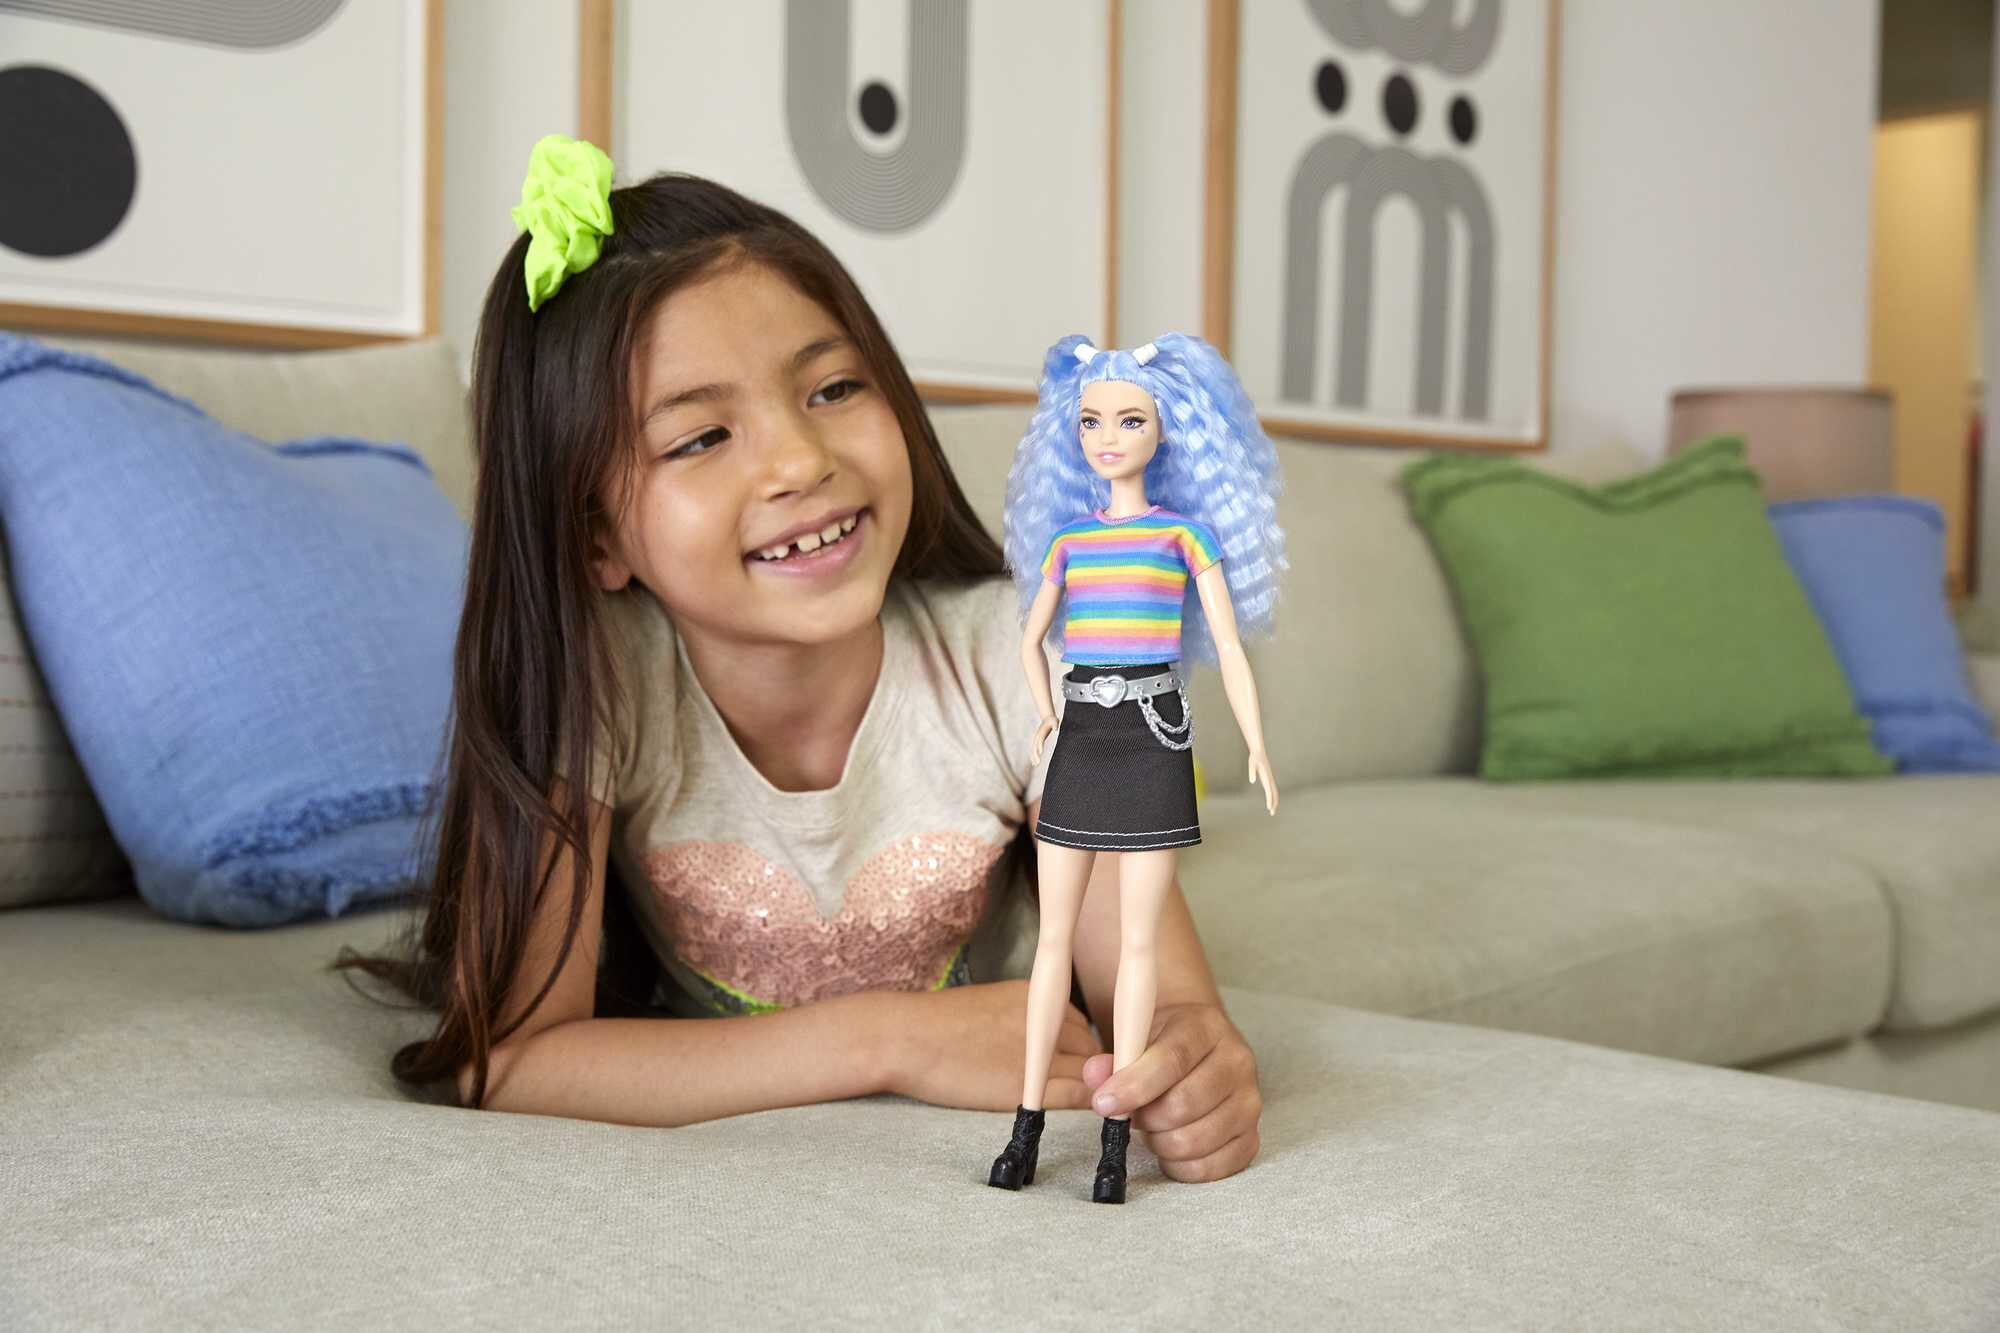 Barbie Fashionistas Doll #170 with Long Blue Crimped Hair, Star Face Makeup in Striped Tee - image 3 of 7